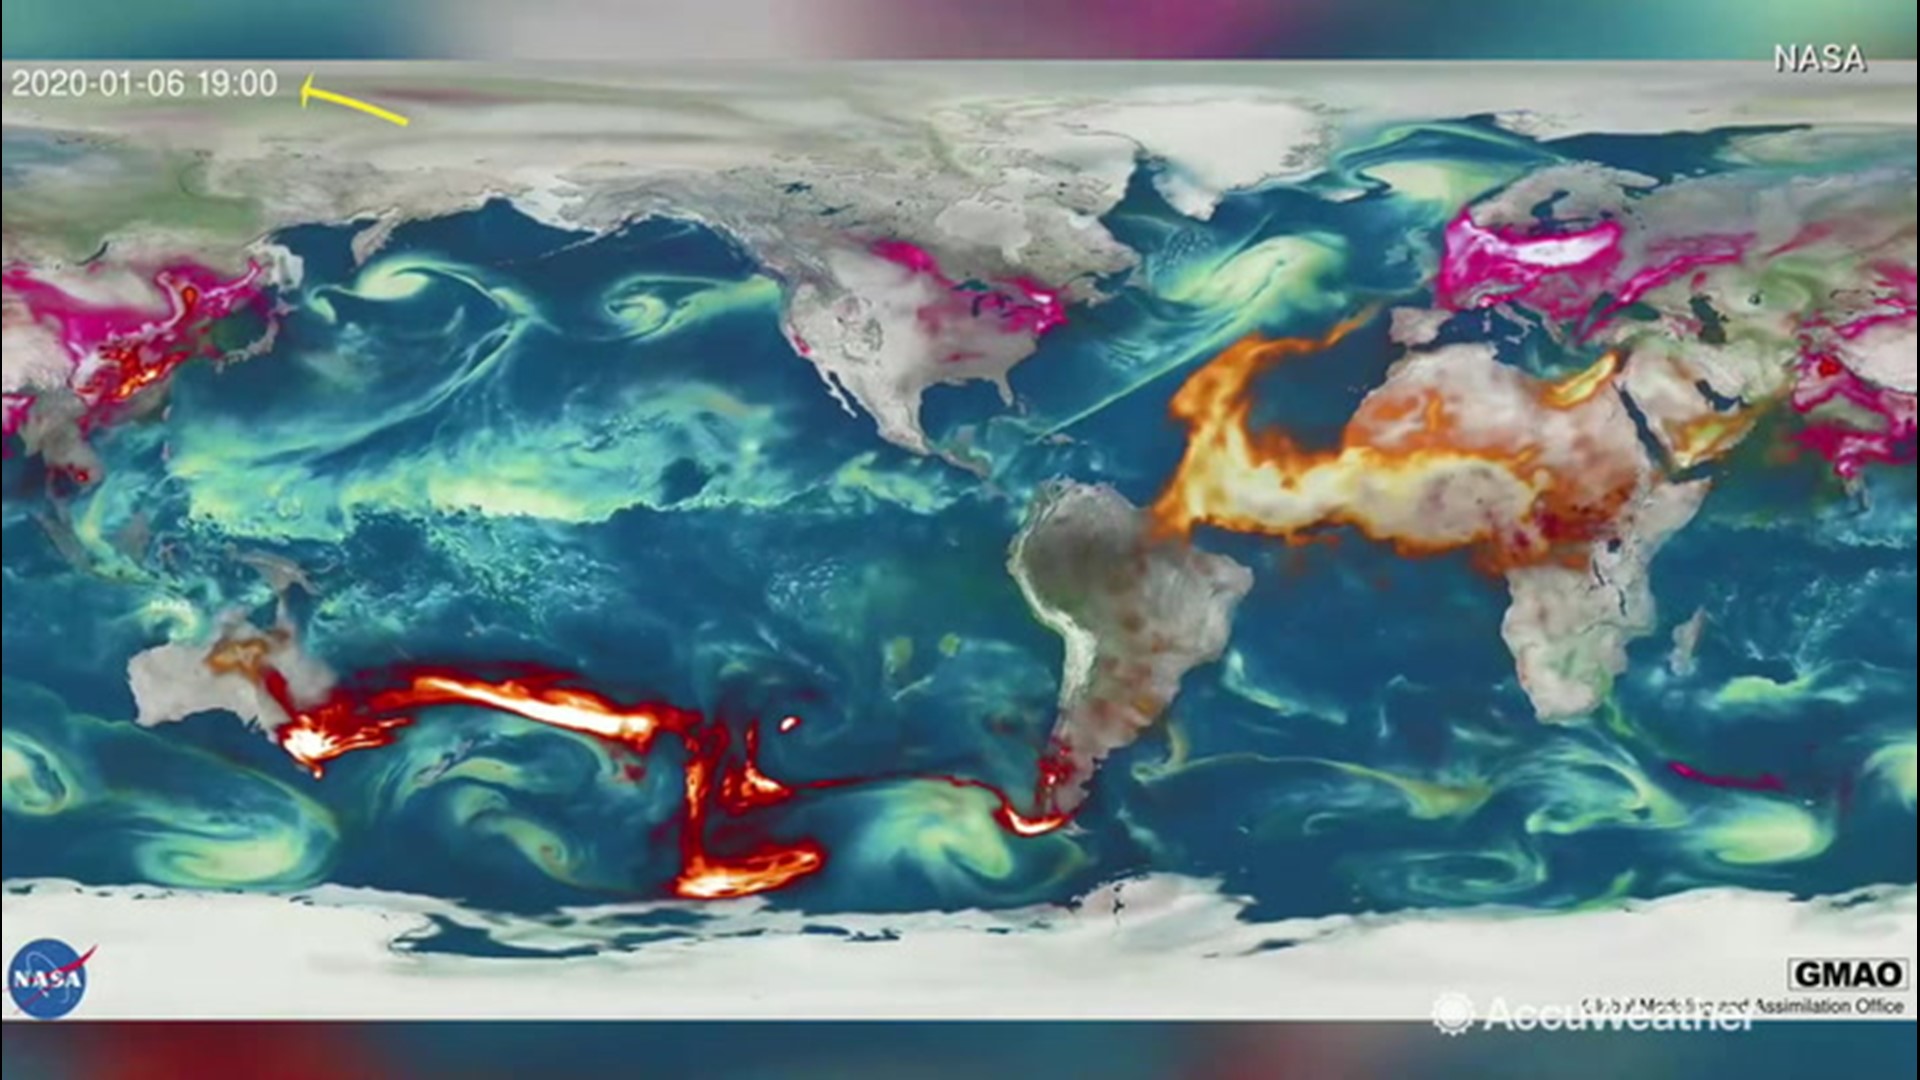 This mesmerizing animation shows several high-impact events between Aug. 2019 and Jan. 2020, including Hurricane Dorian and the Australia wildfires.